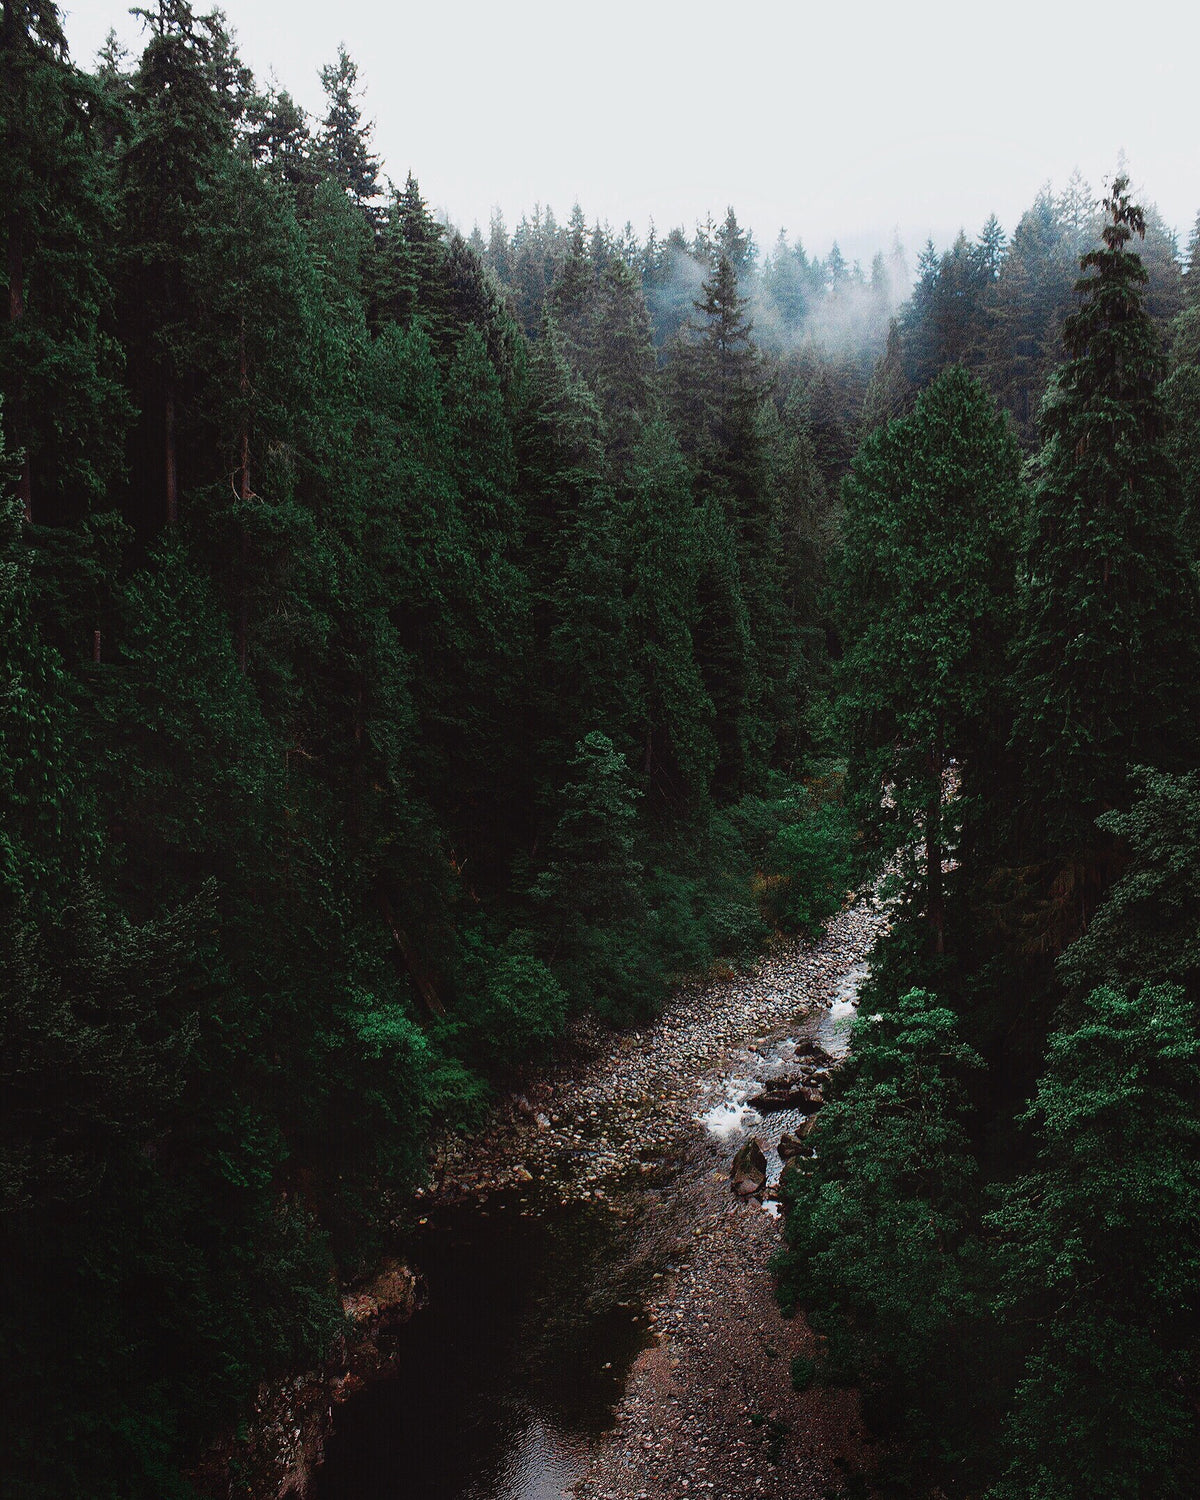 rocky river in dense forest